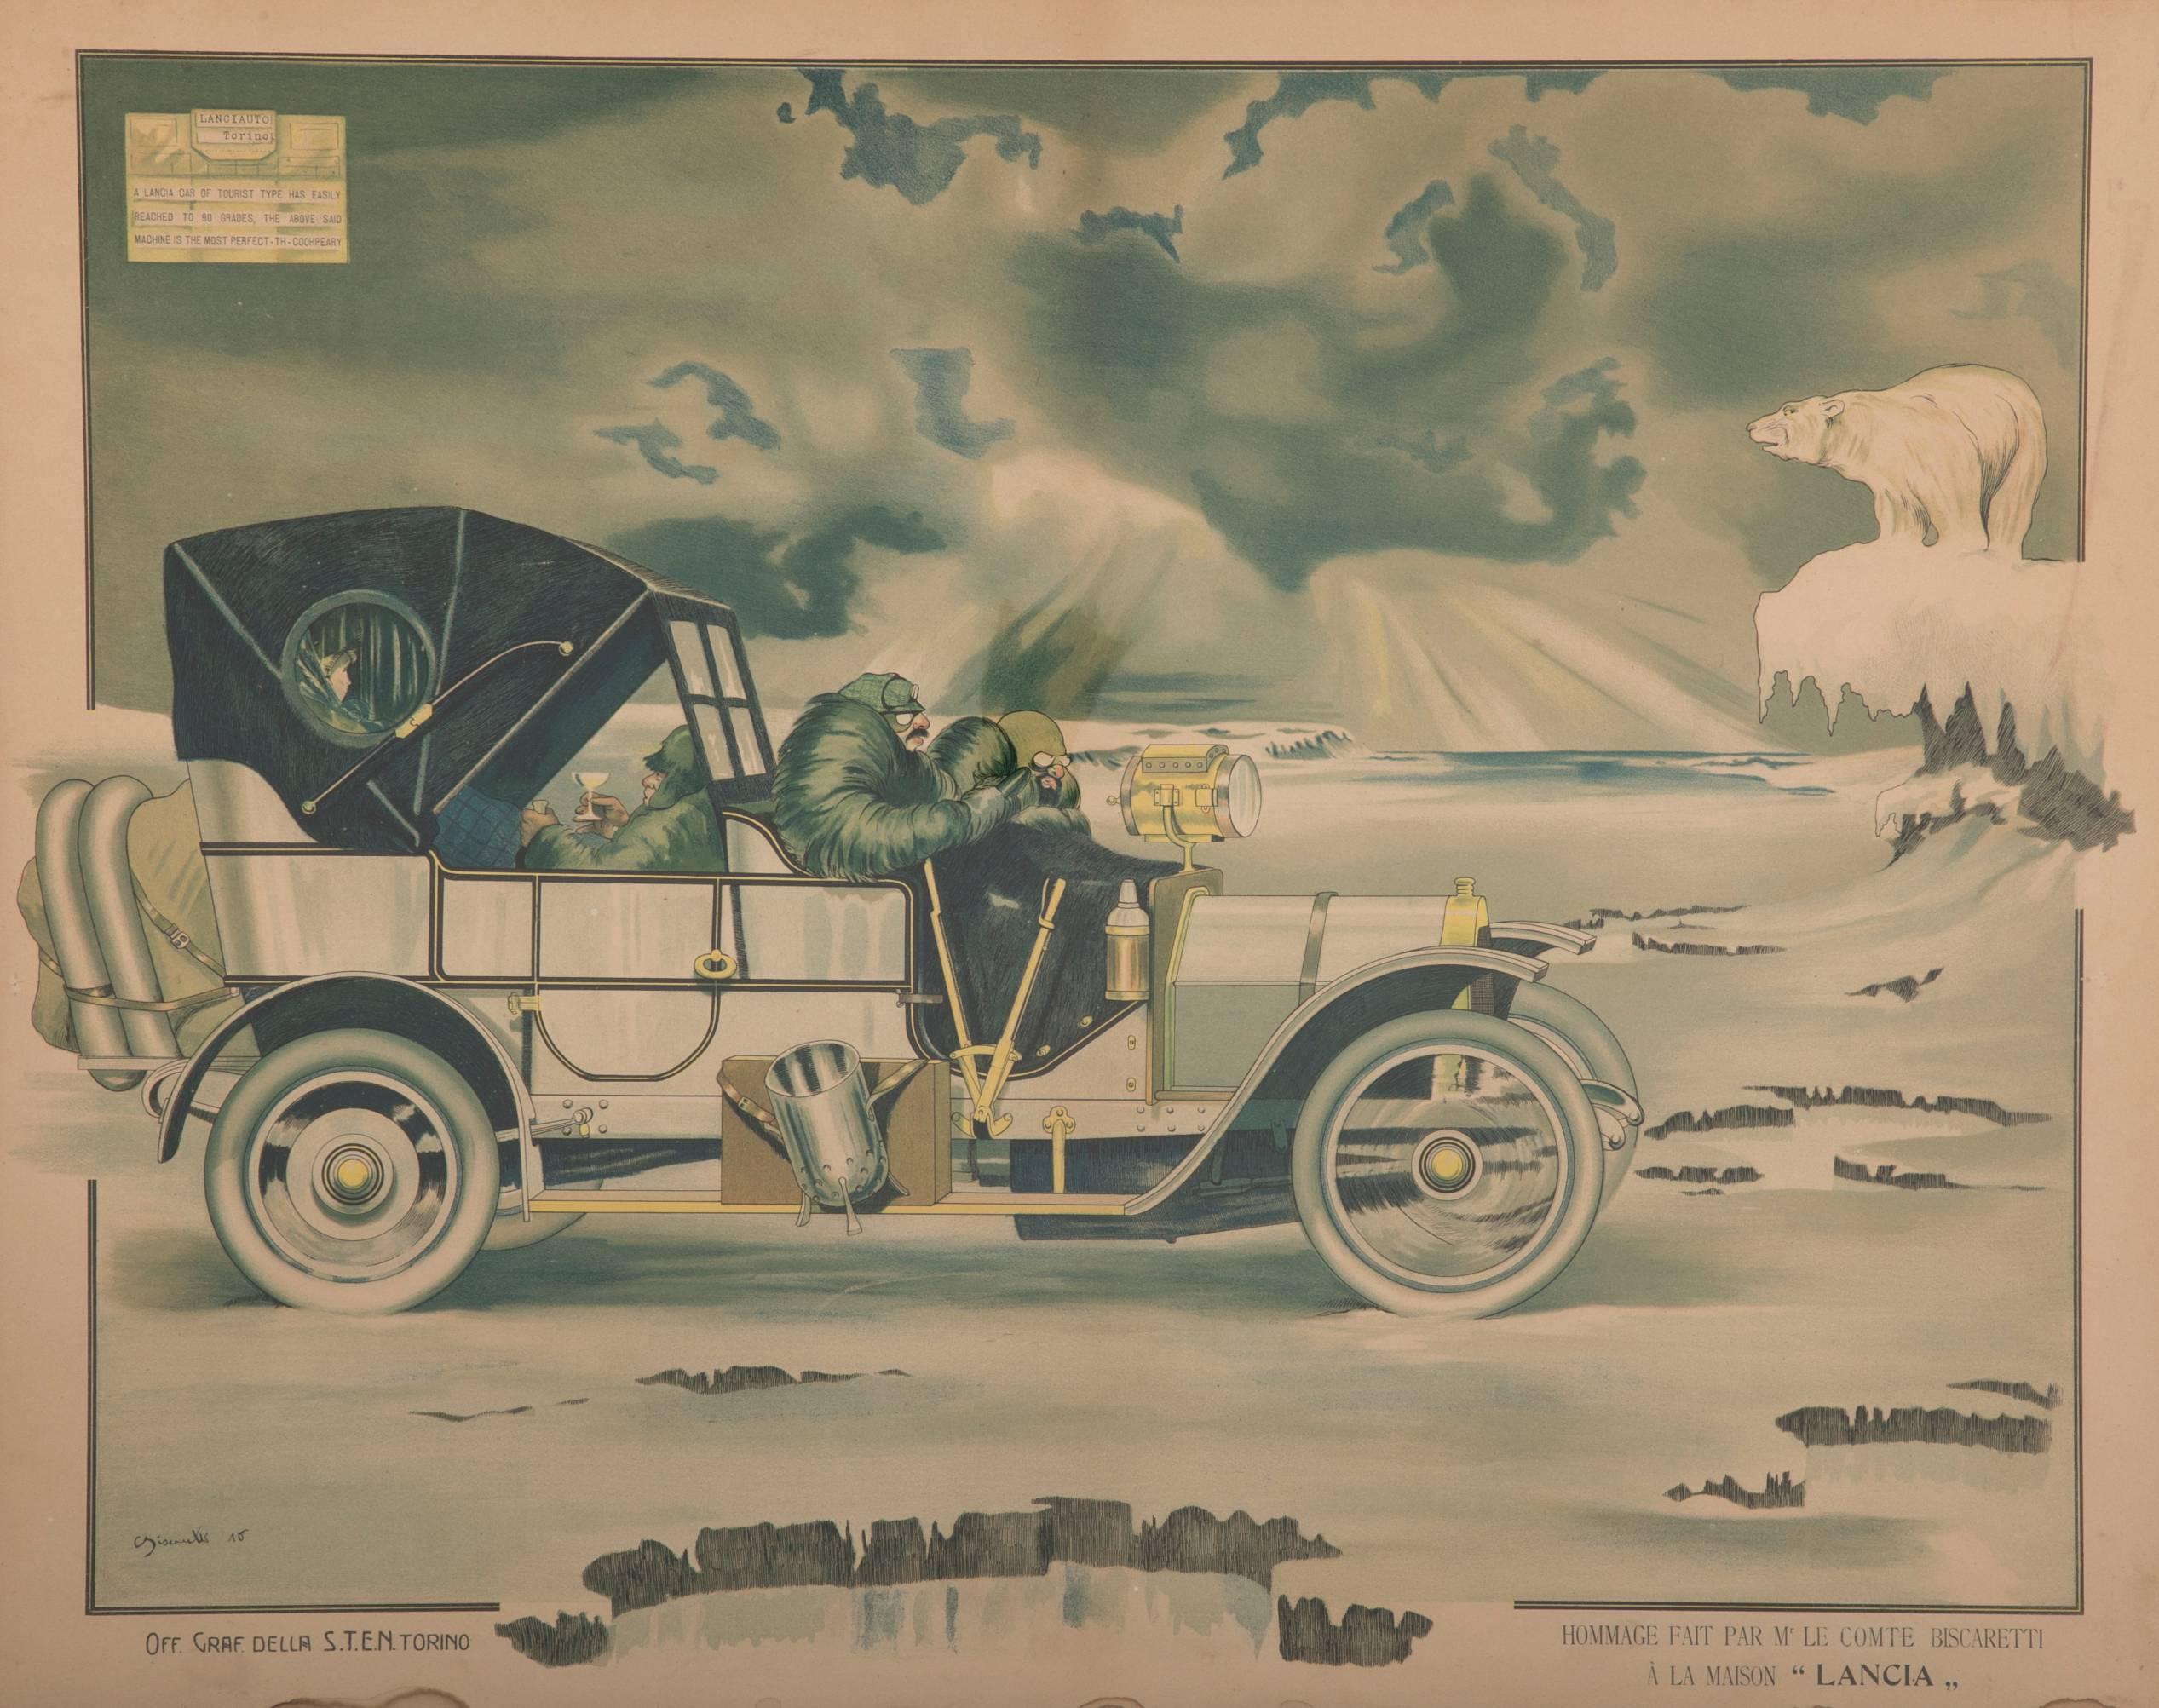 This poster shows you can take a Lancia Automobile on any adventure – even to the Artic – and do it in style and luxury!

 

This cleverly designed poster was, in all likelihood, printed in Italy. The lower left has the date of 15 (1915). The